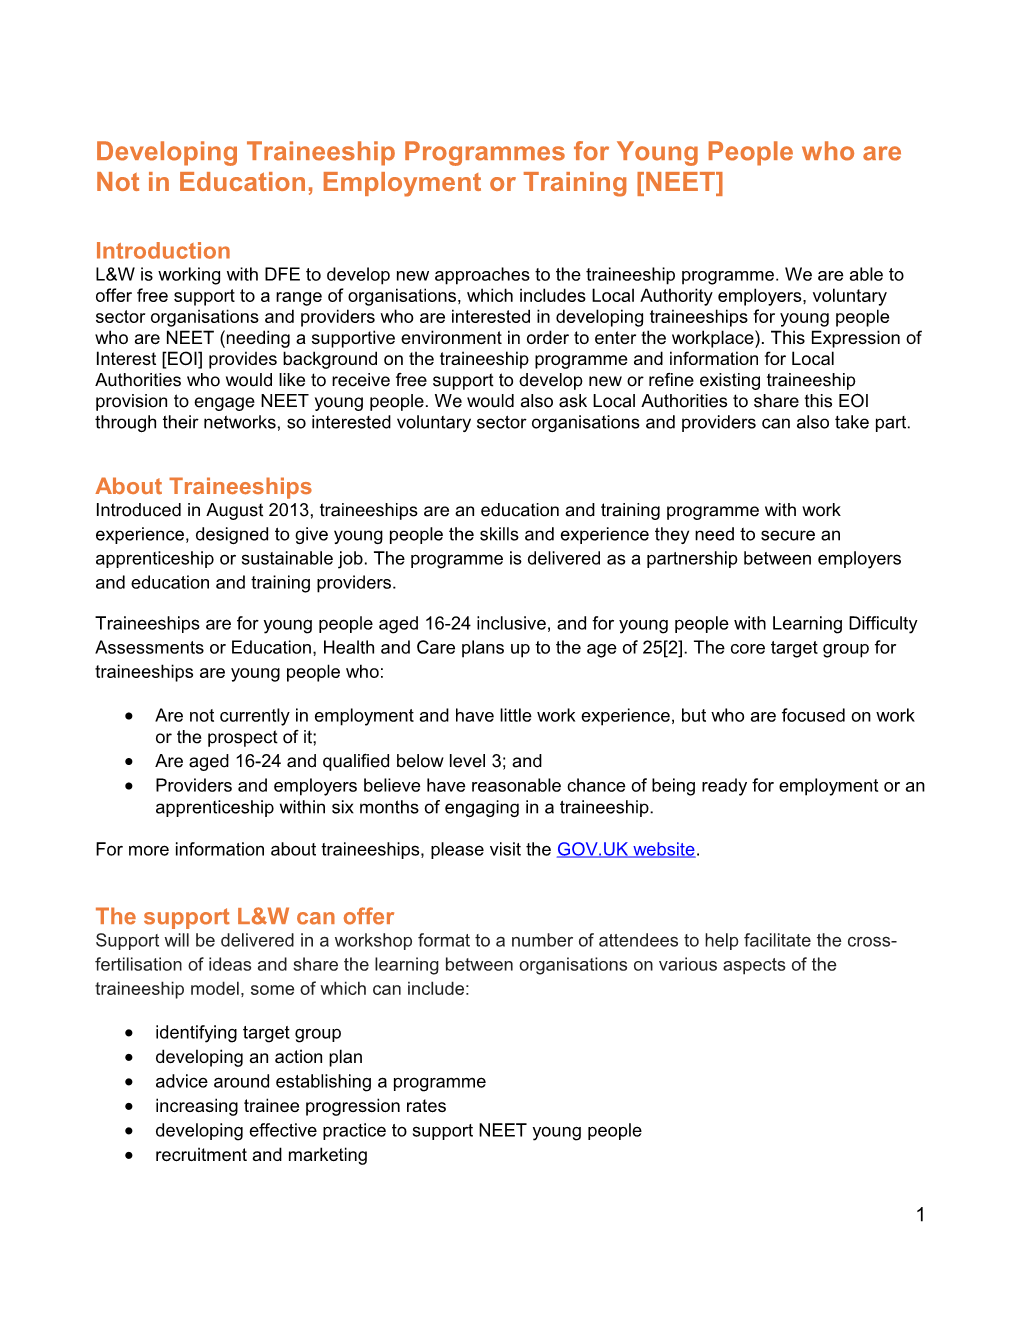 Developing Traineeship Programmes for Young People Who Are Not in Education, Employment